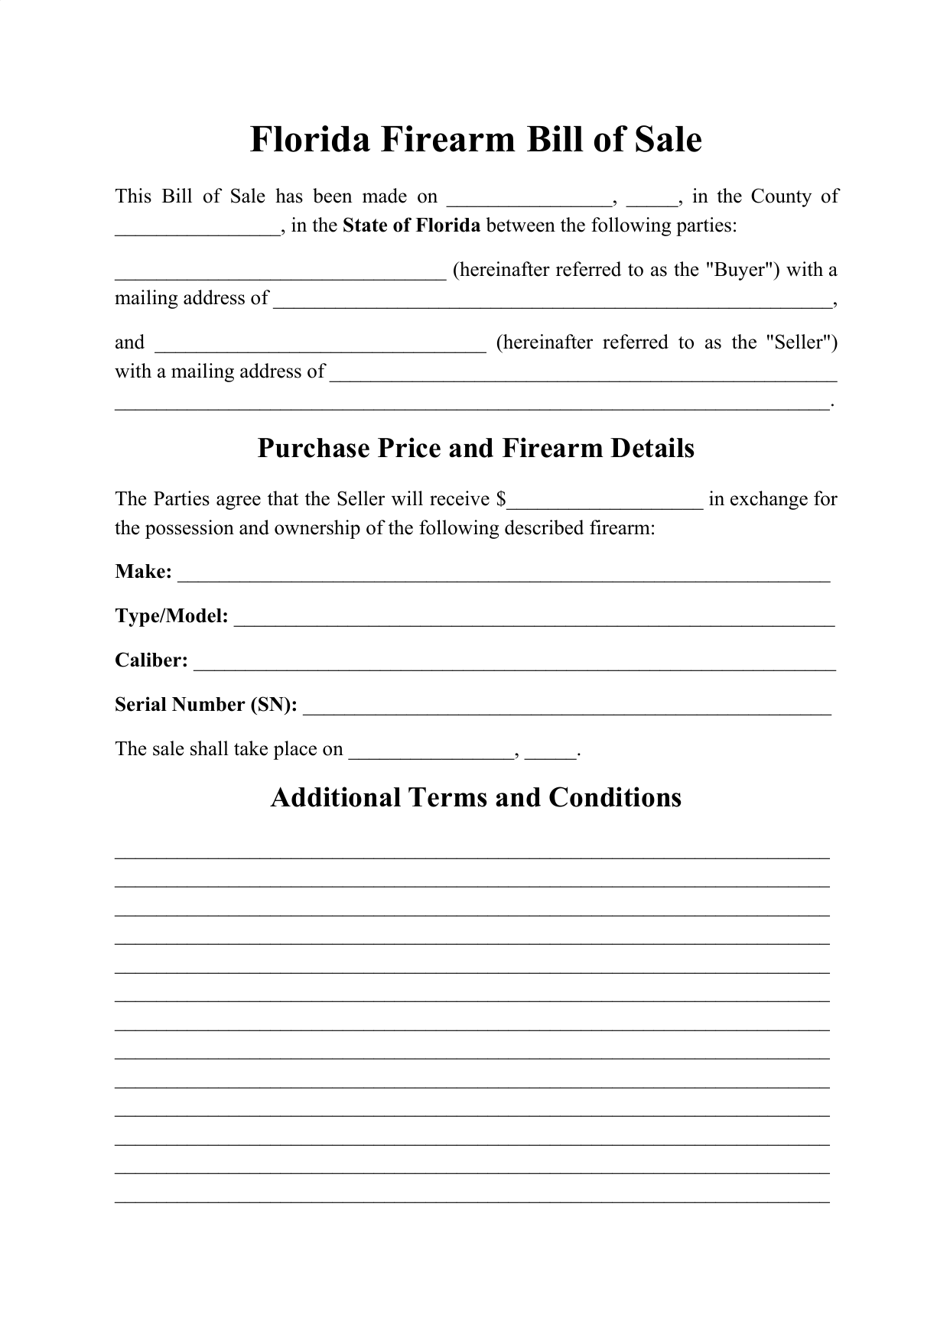 Florida Firearm Bill of Sale Form Fill Out Sign Online and Download